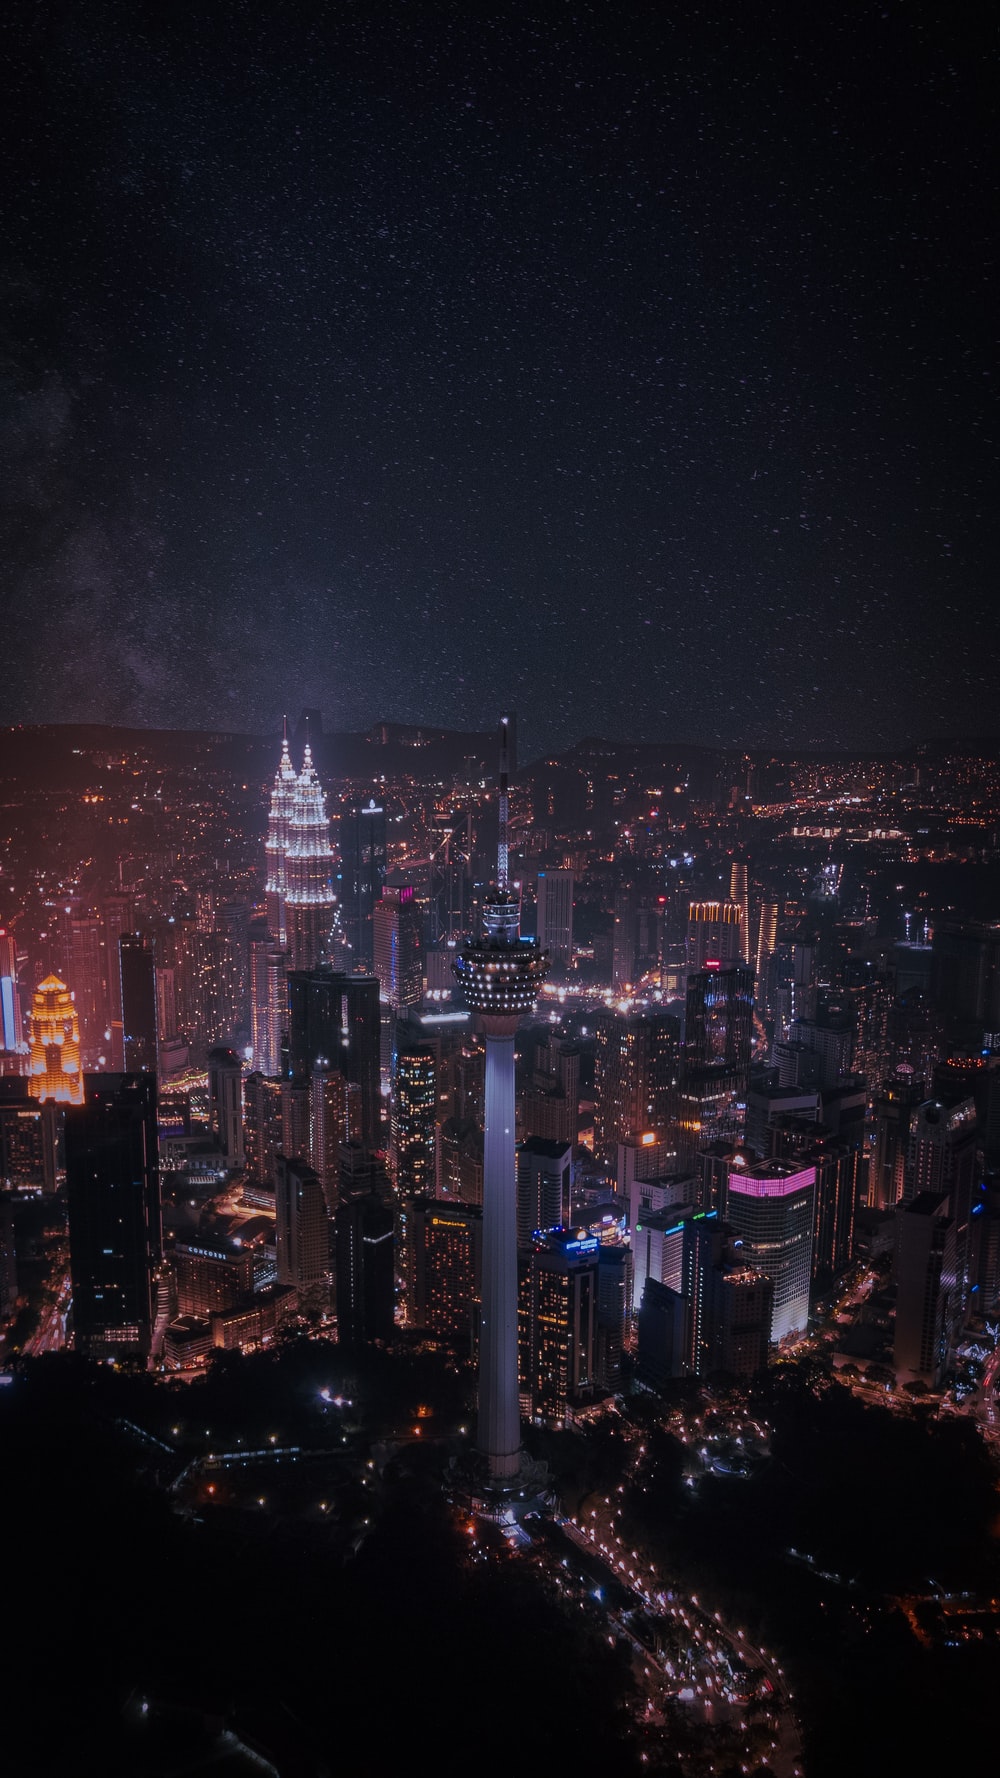 Night Skyline Picture. Download Free Image